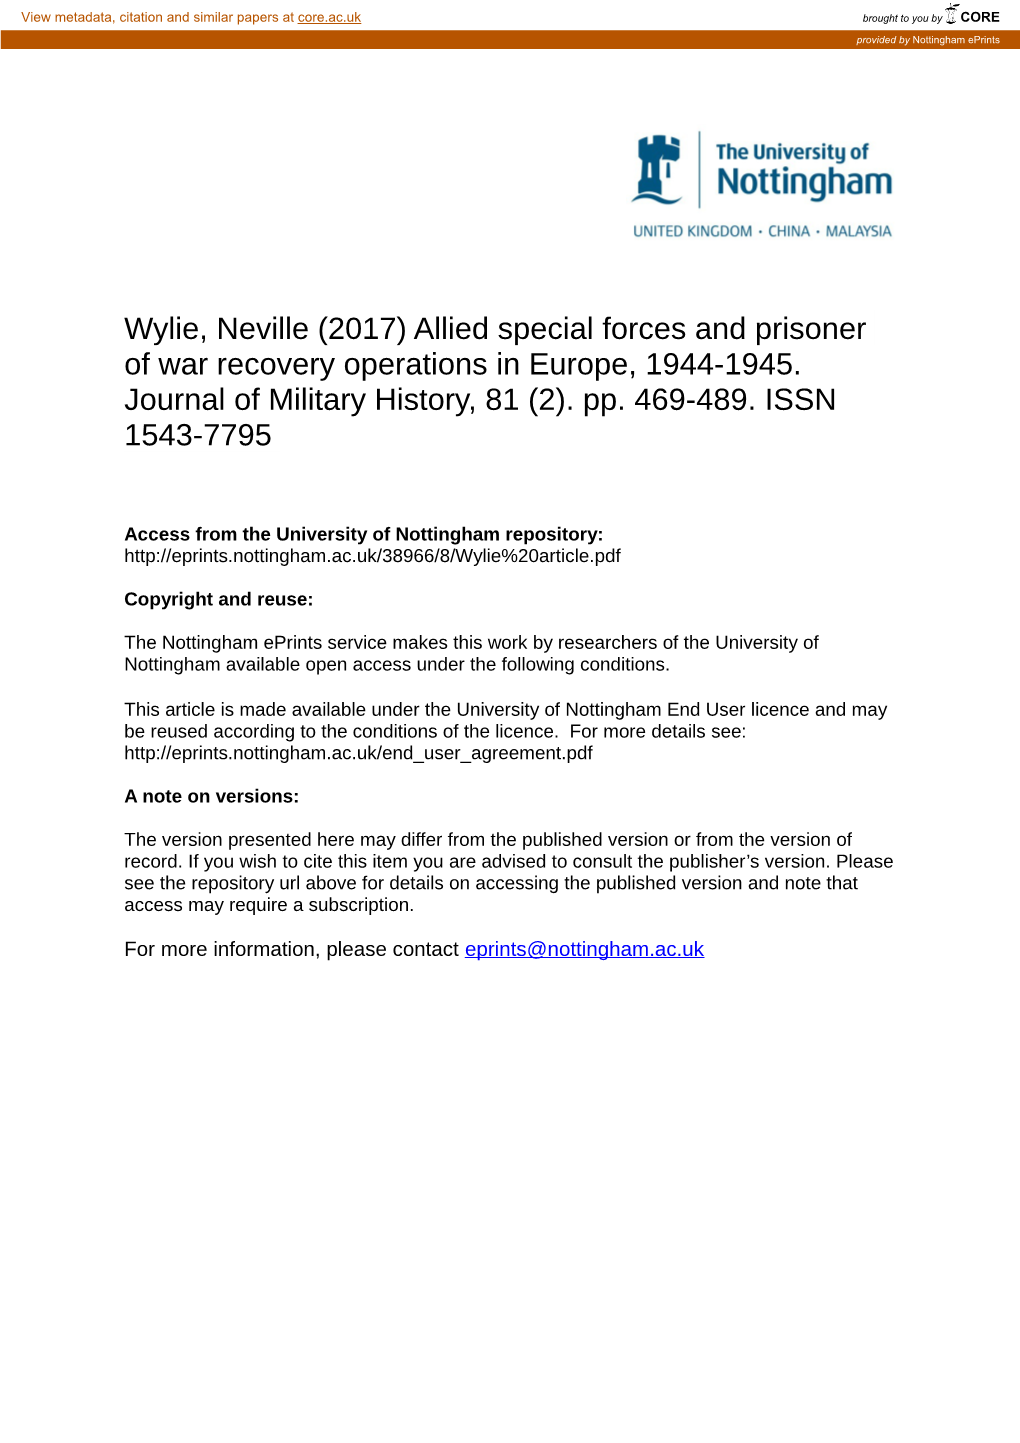 Wylie, Neville (2017) Allied Special Forces and Prisoner of War Recovery Operations in Europe, 1944-1945. Journal of Military History, 81 (2)